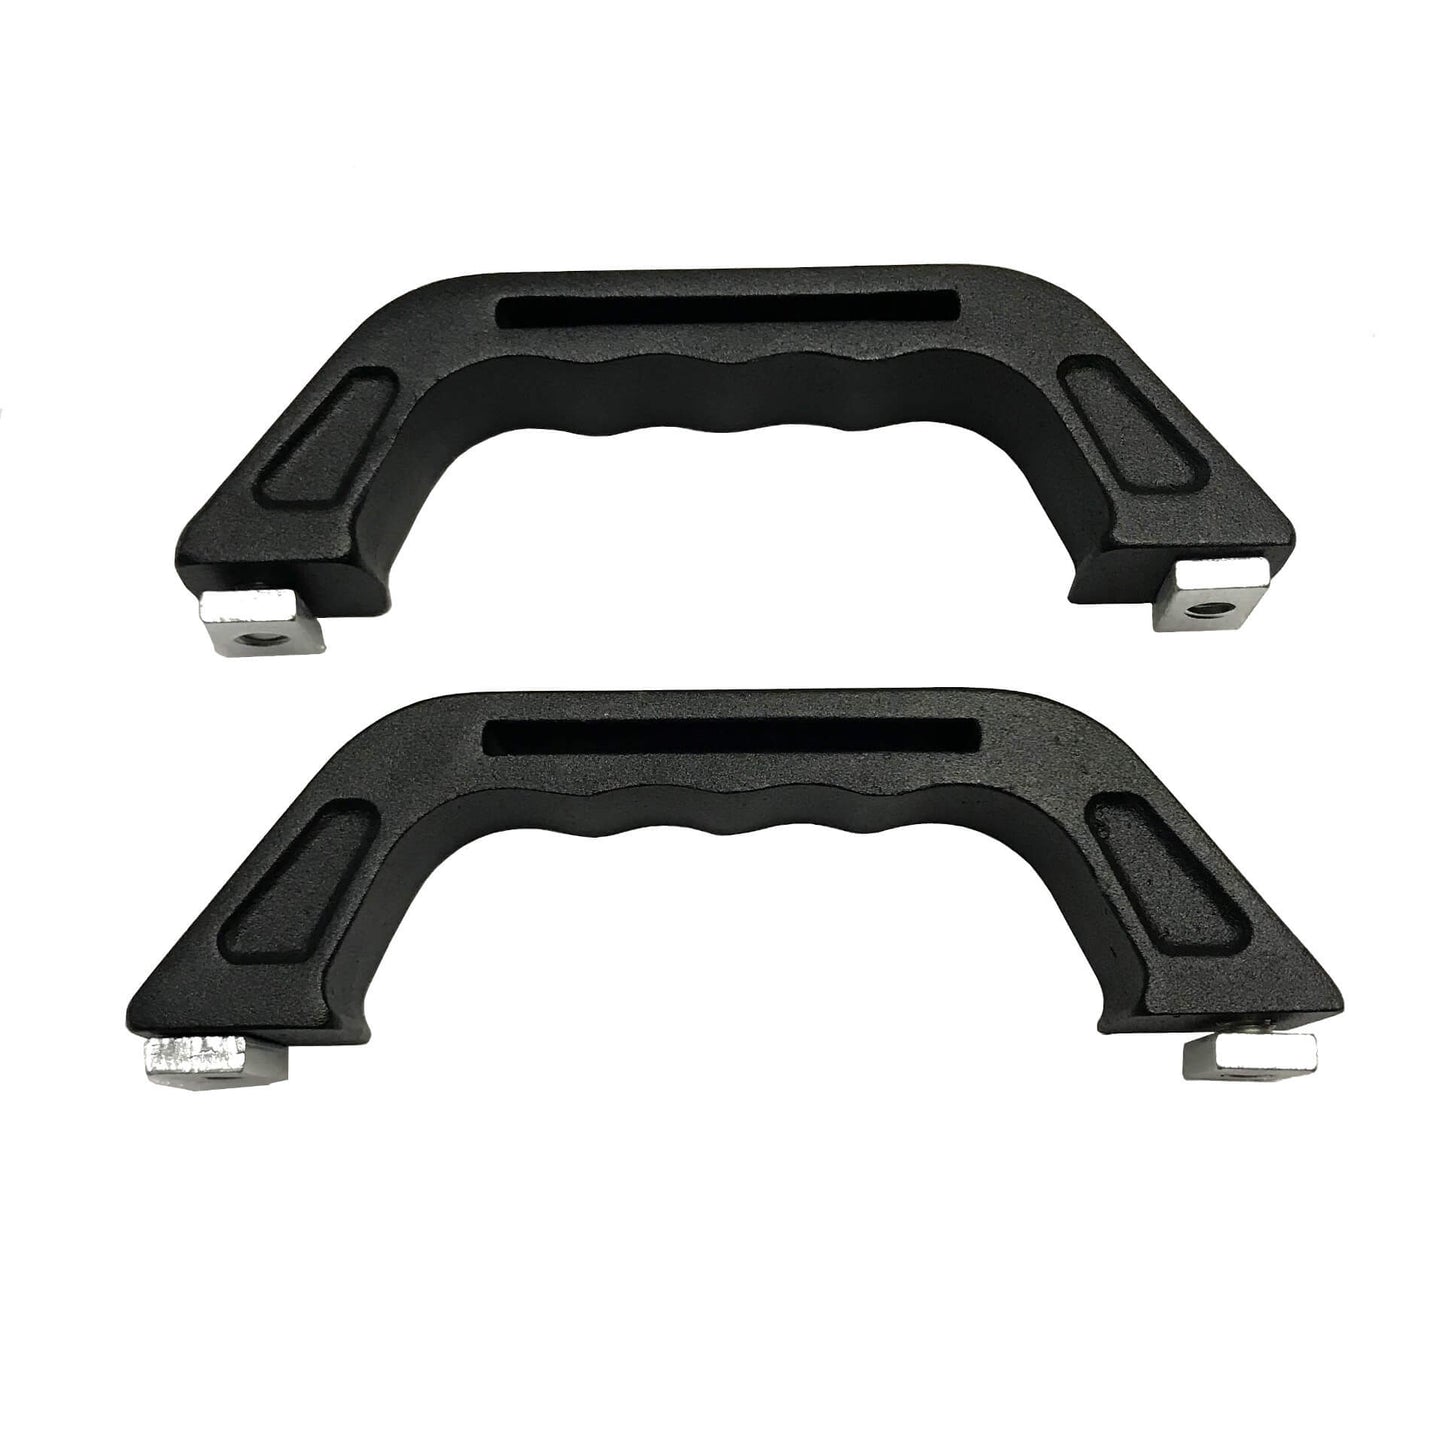 Aluminium Grab Handle for Direct4x4 AluMod Low Profile Roof Racks -  - sold by Direct4x4